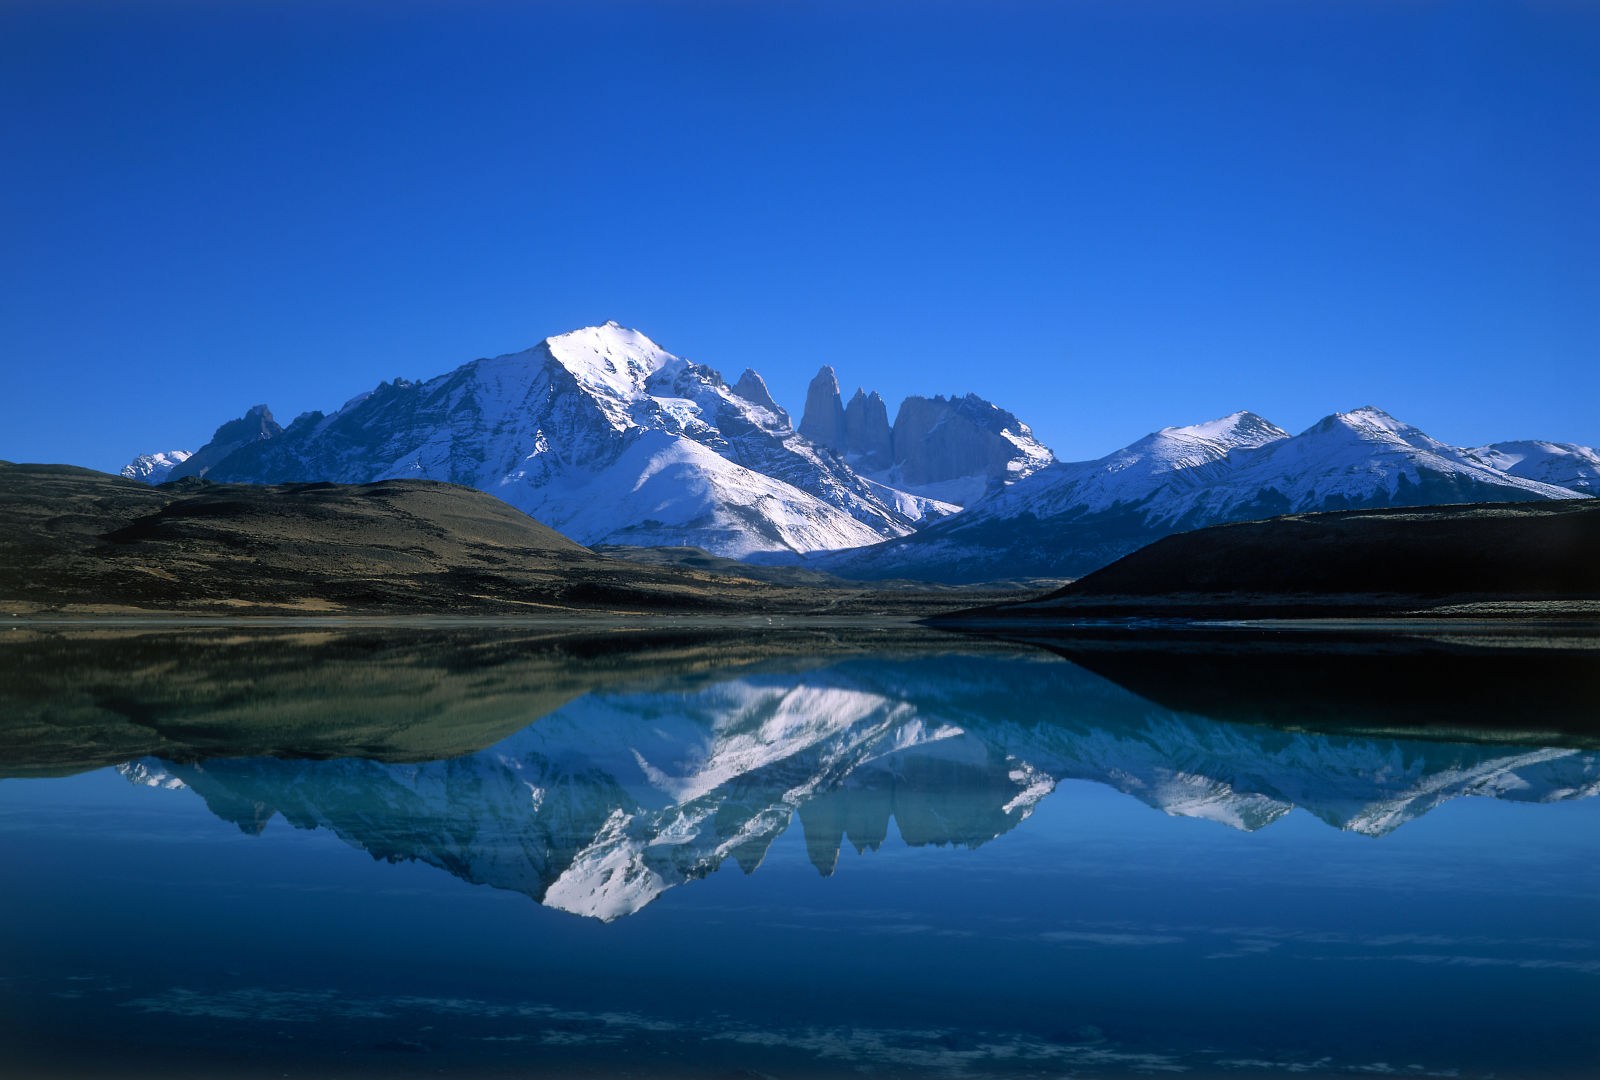 The peaks of Torres del Paine national park and the summit of Almirante Nieto on the left reflected in Laguna Amarga, Chile